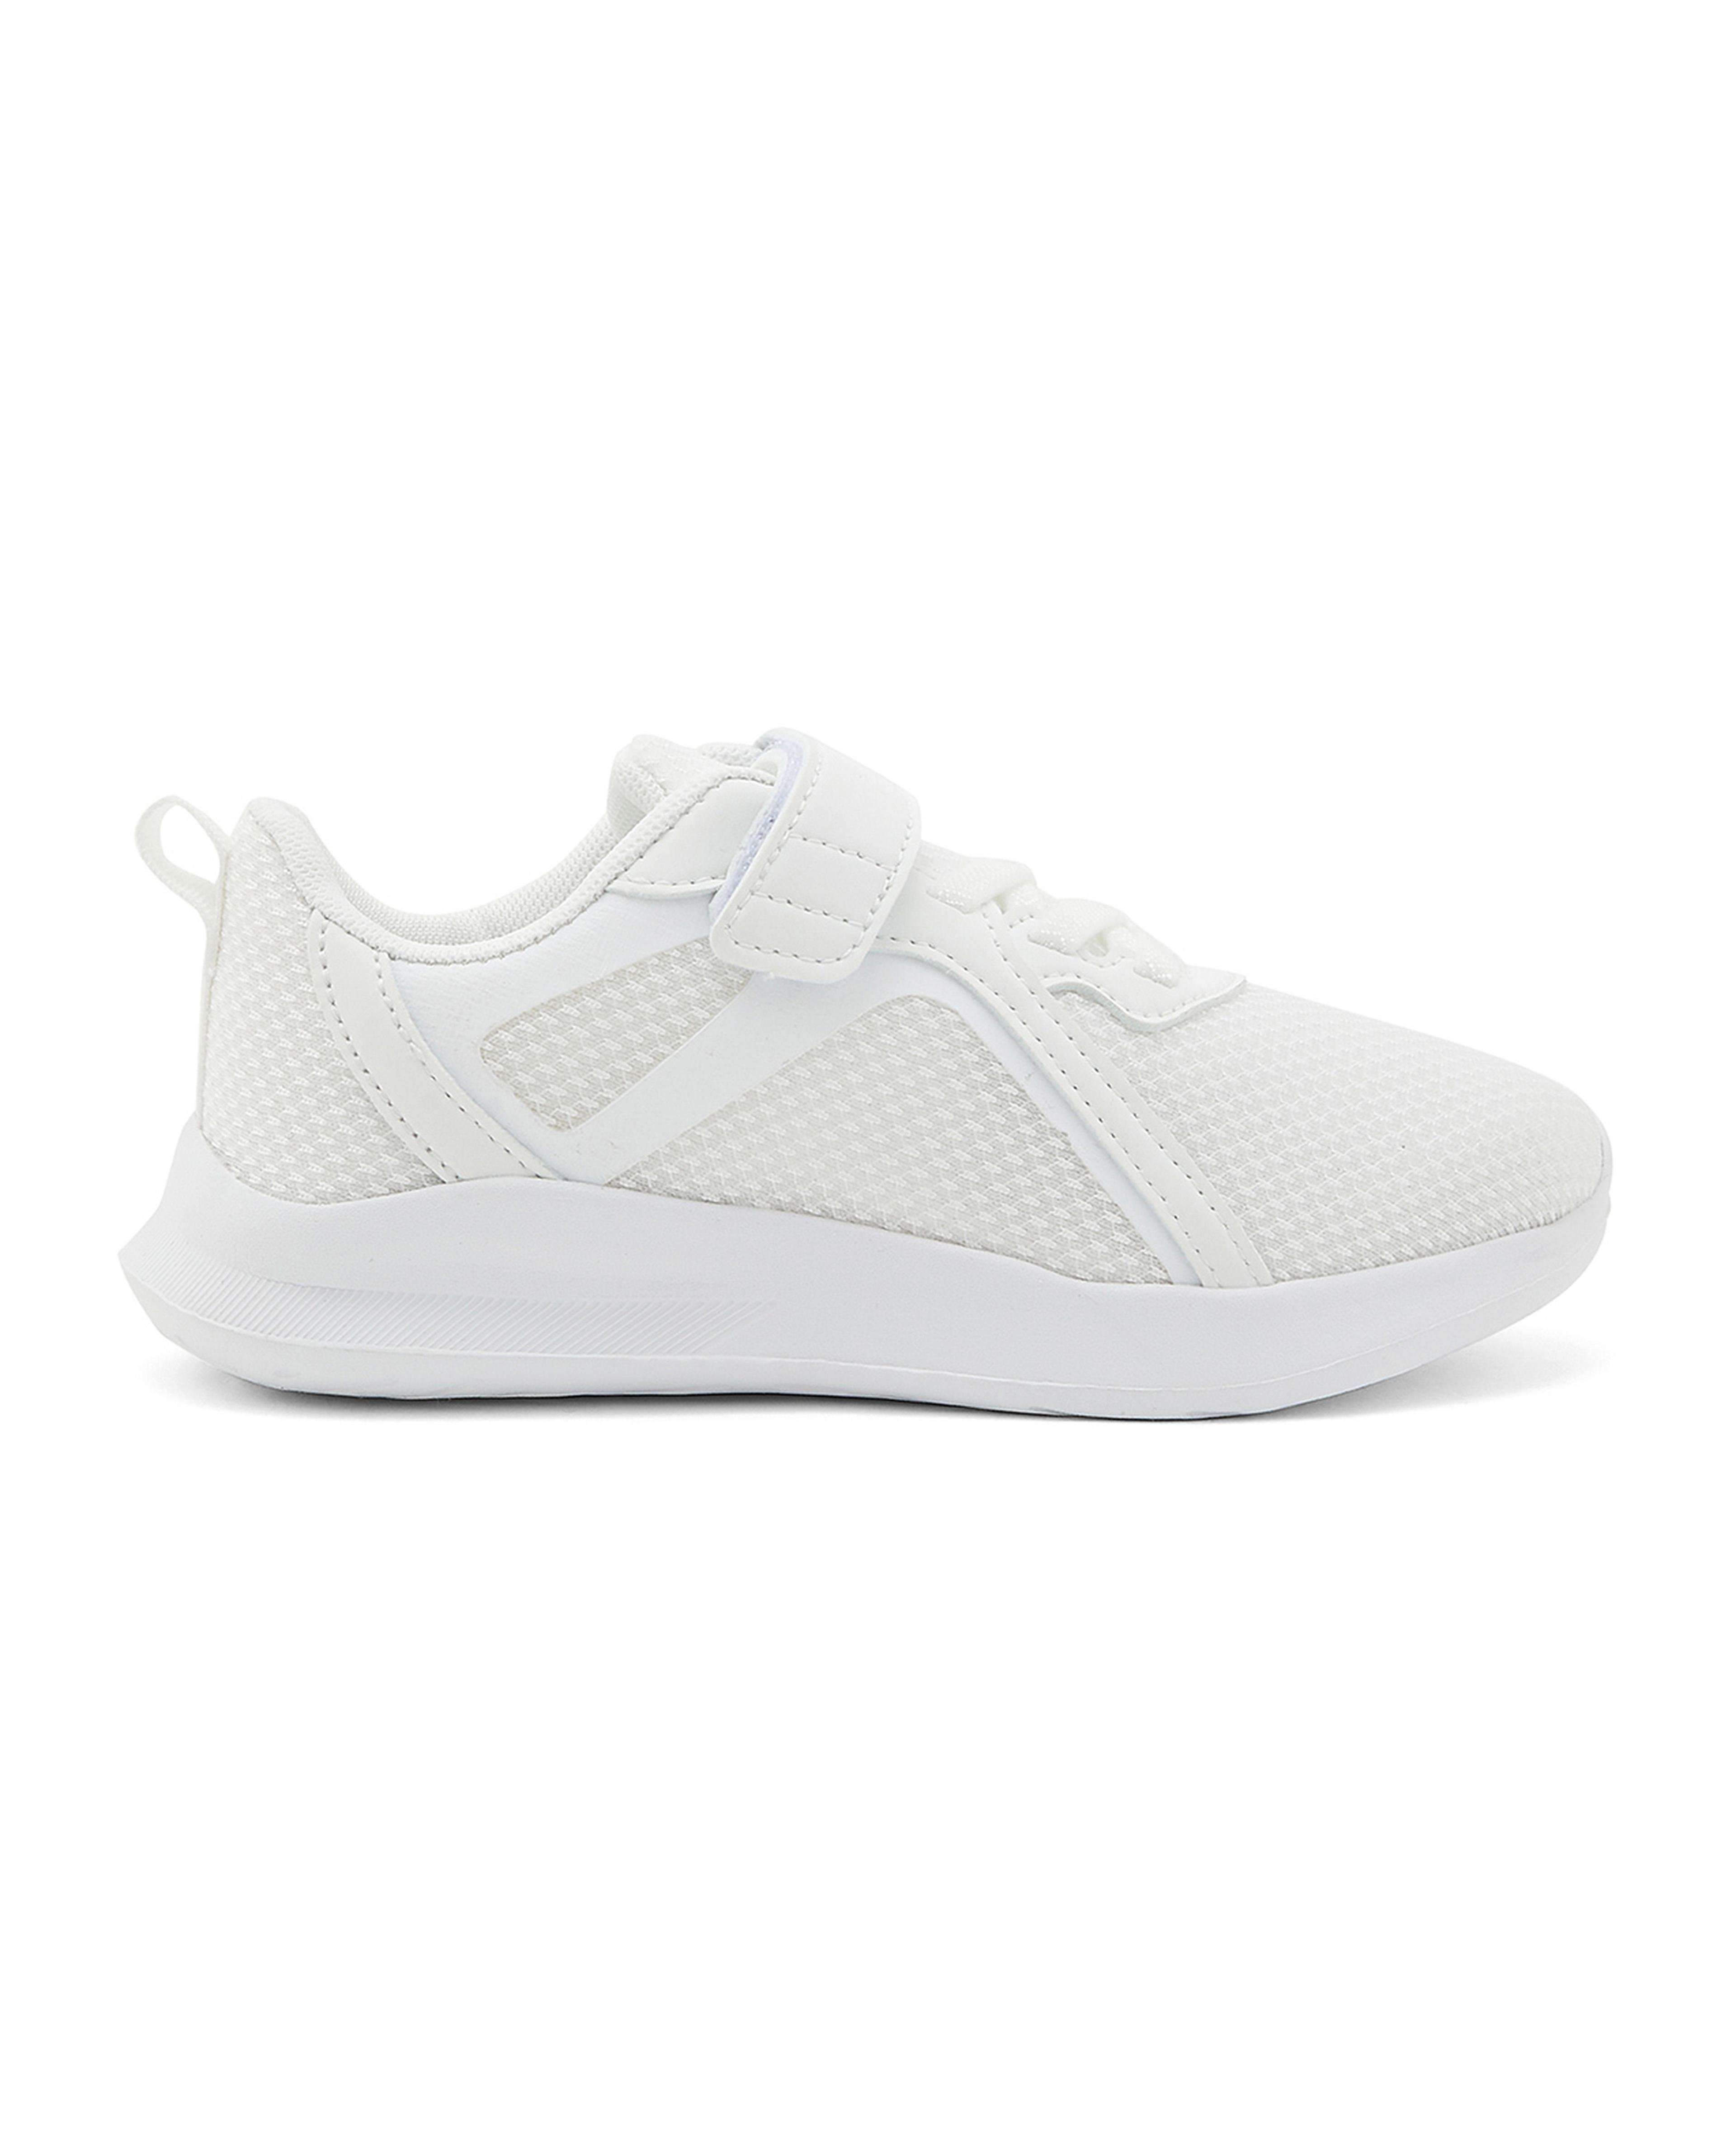 Solid Sports Shoes with Velcro Closure